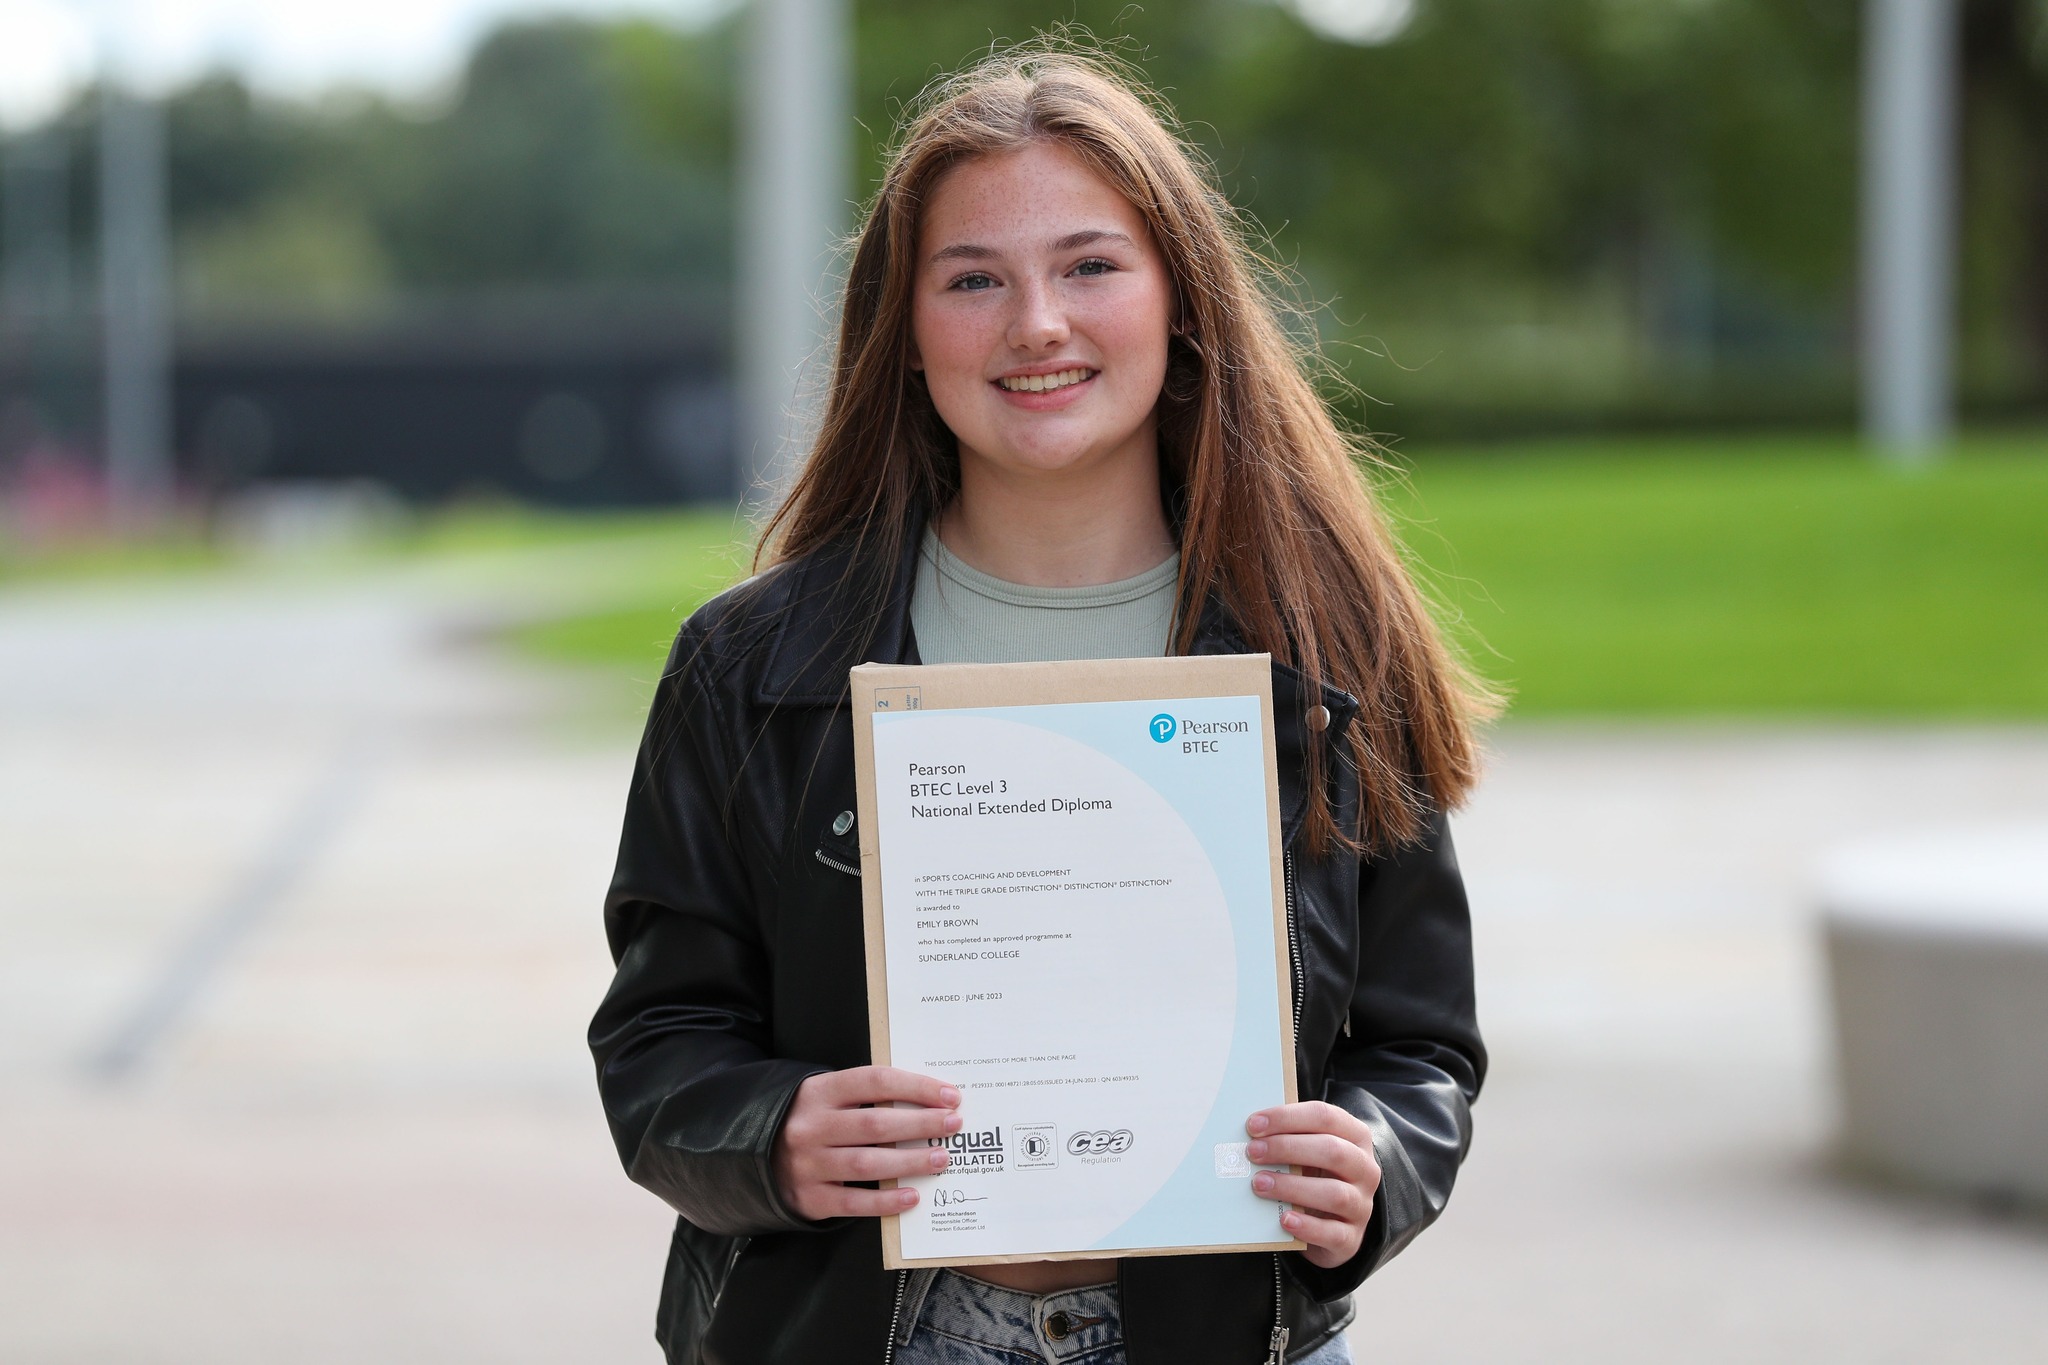 Emily Brown smiles at the camera while holding her college certificates.